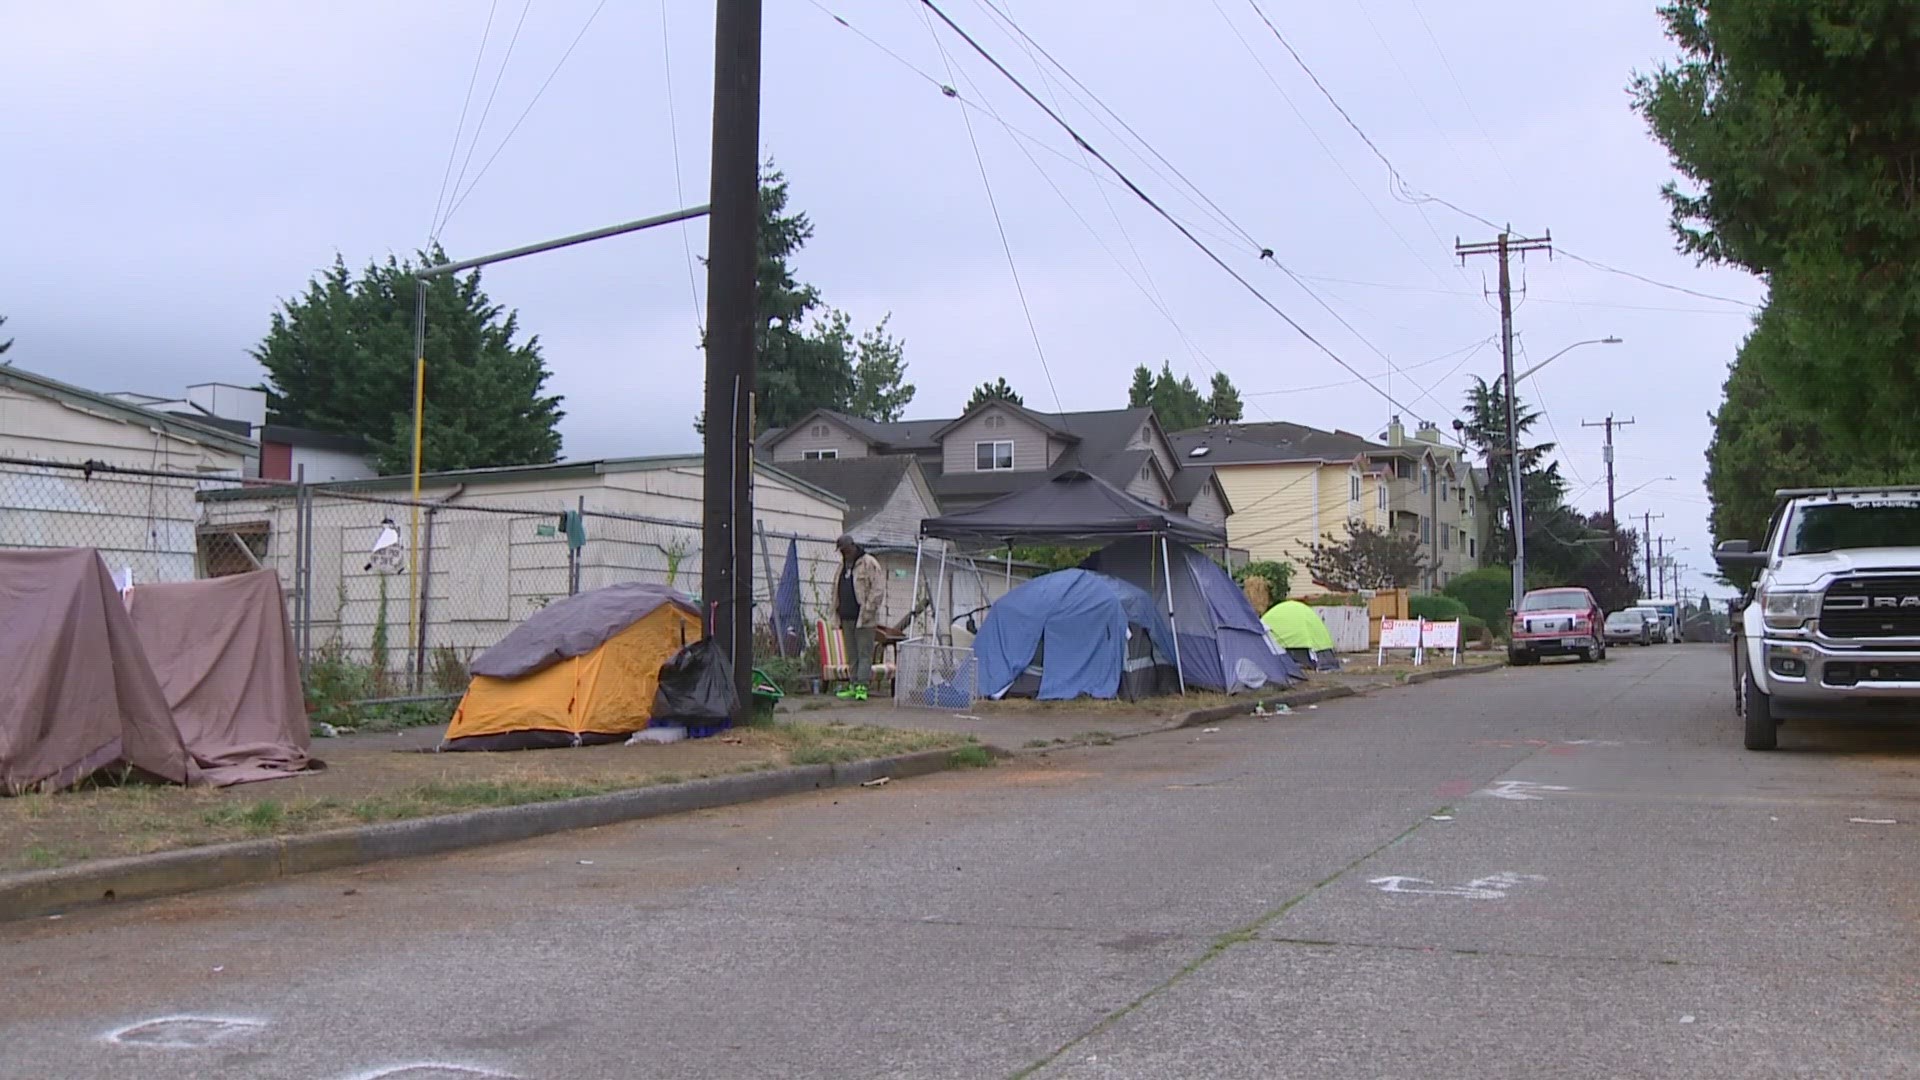 City of Seattle posts another 48-hour notice to vacate north Seattle encampment, but advocates say that isn't enough time.